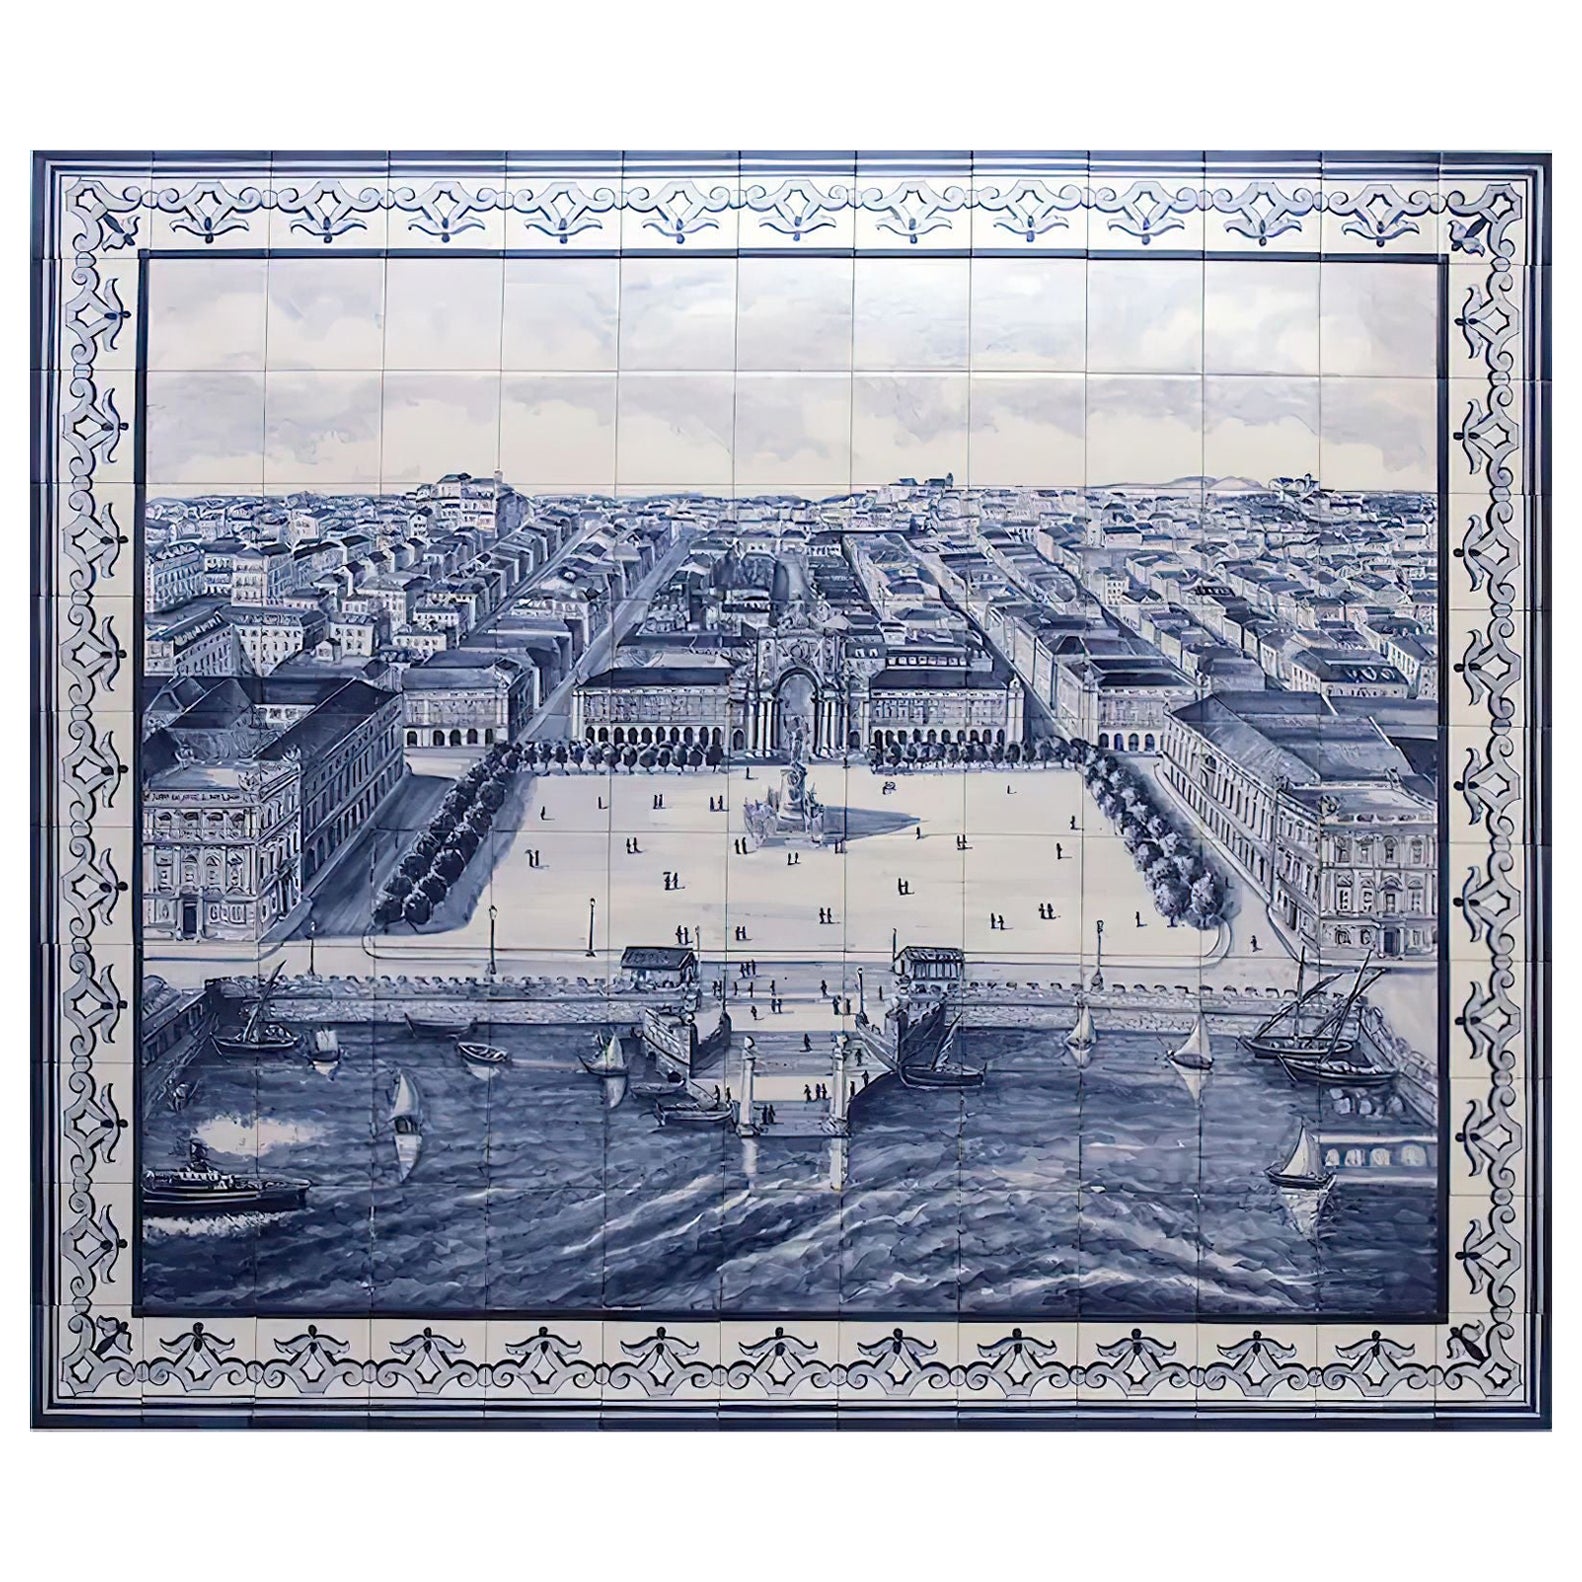 Portuguese Tile Mural - Hand Painted - Indoor/Outdoor Tiles "Lisbon Portugal"  For Sale